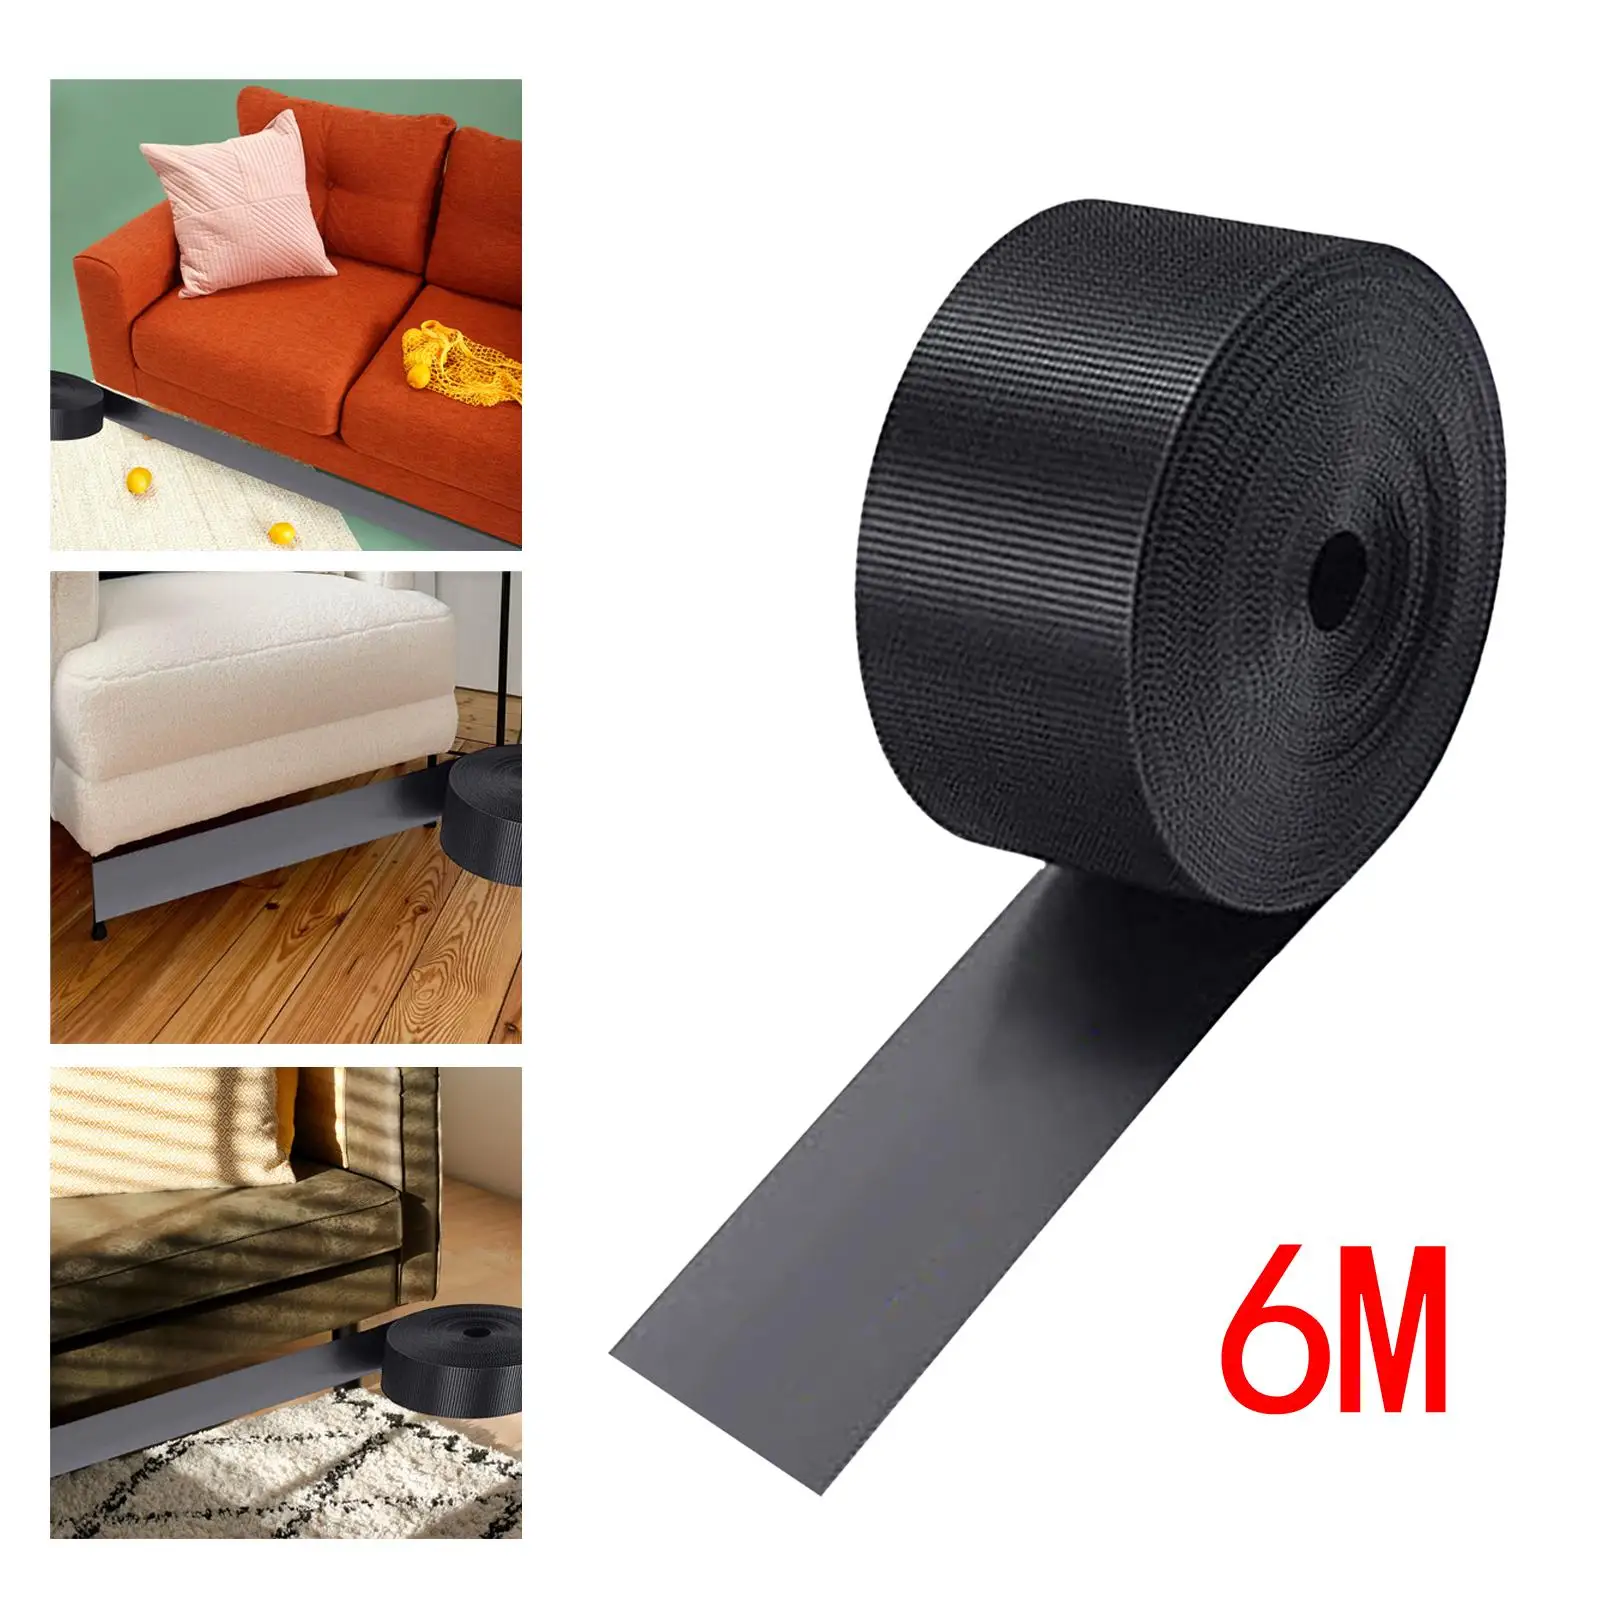 2Pcs Sofa Toy Bumper, Bumper Guard Sectional Connector under Couch Bumper Gap Bumper for Living Room Bed Furniture Couch